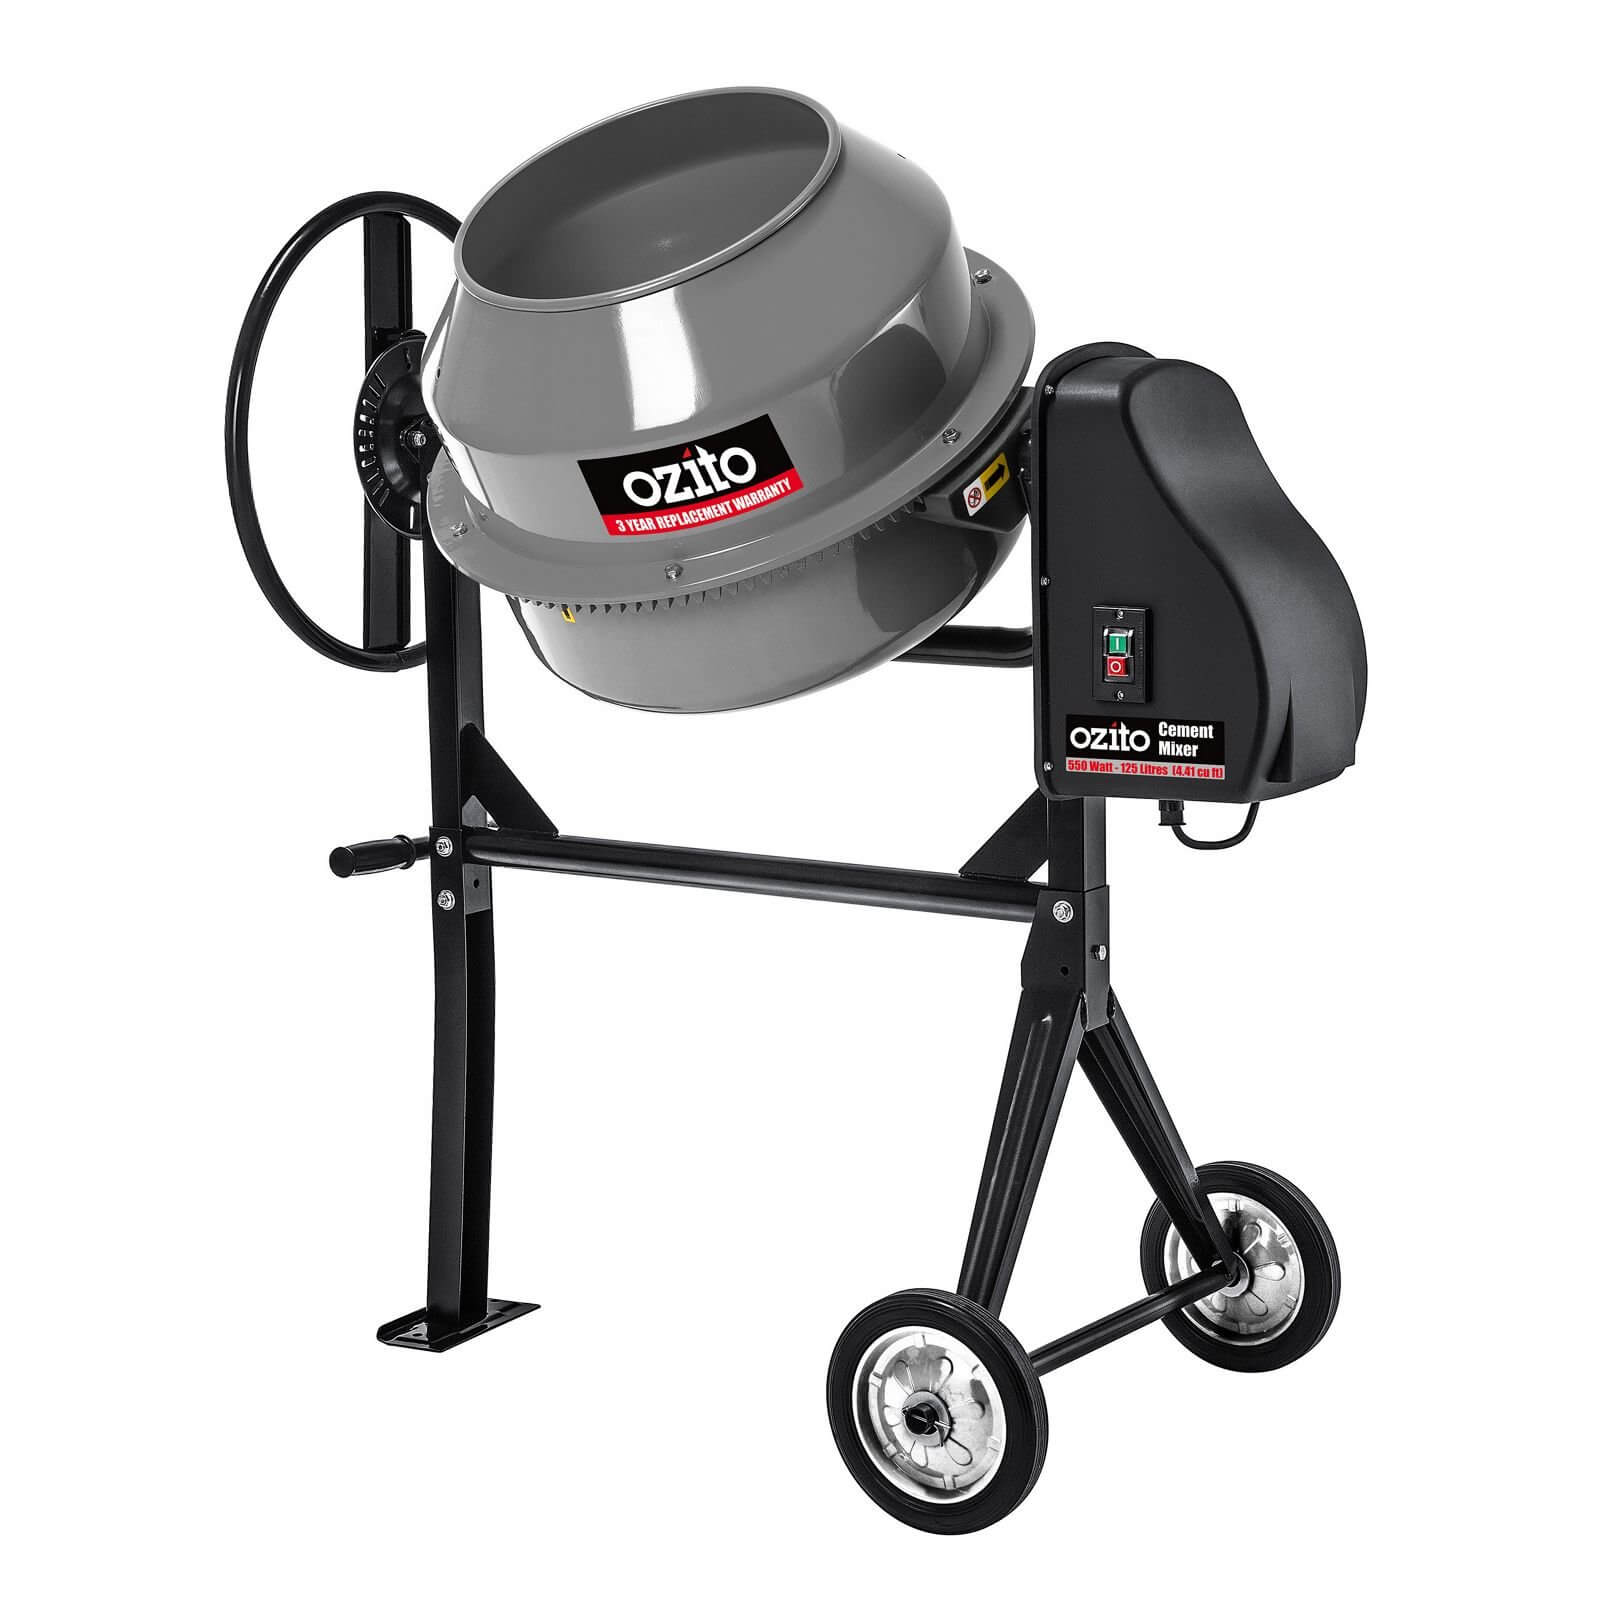 Ozito by Einhell 550W 125L Cement Mixer